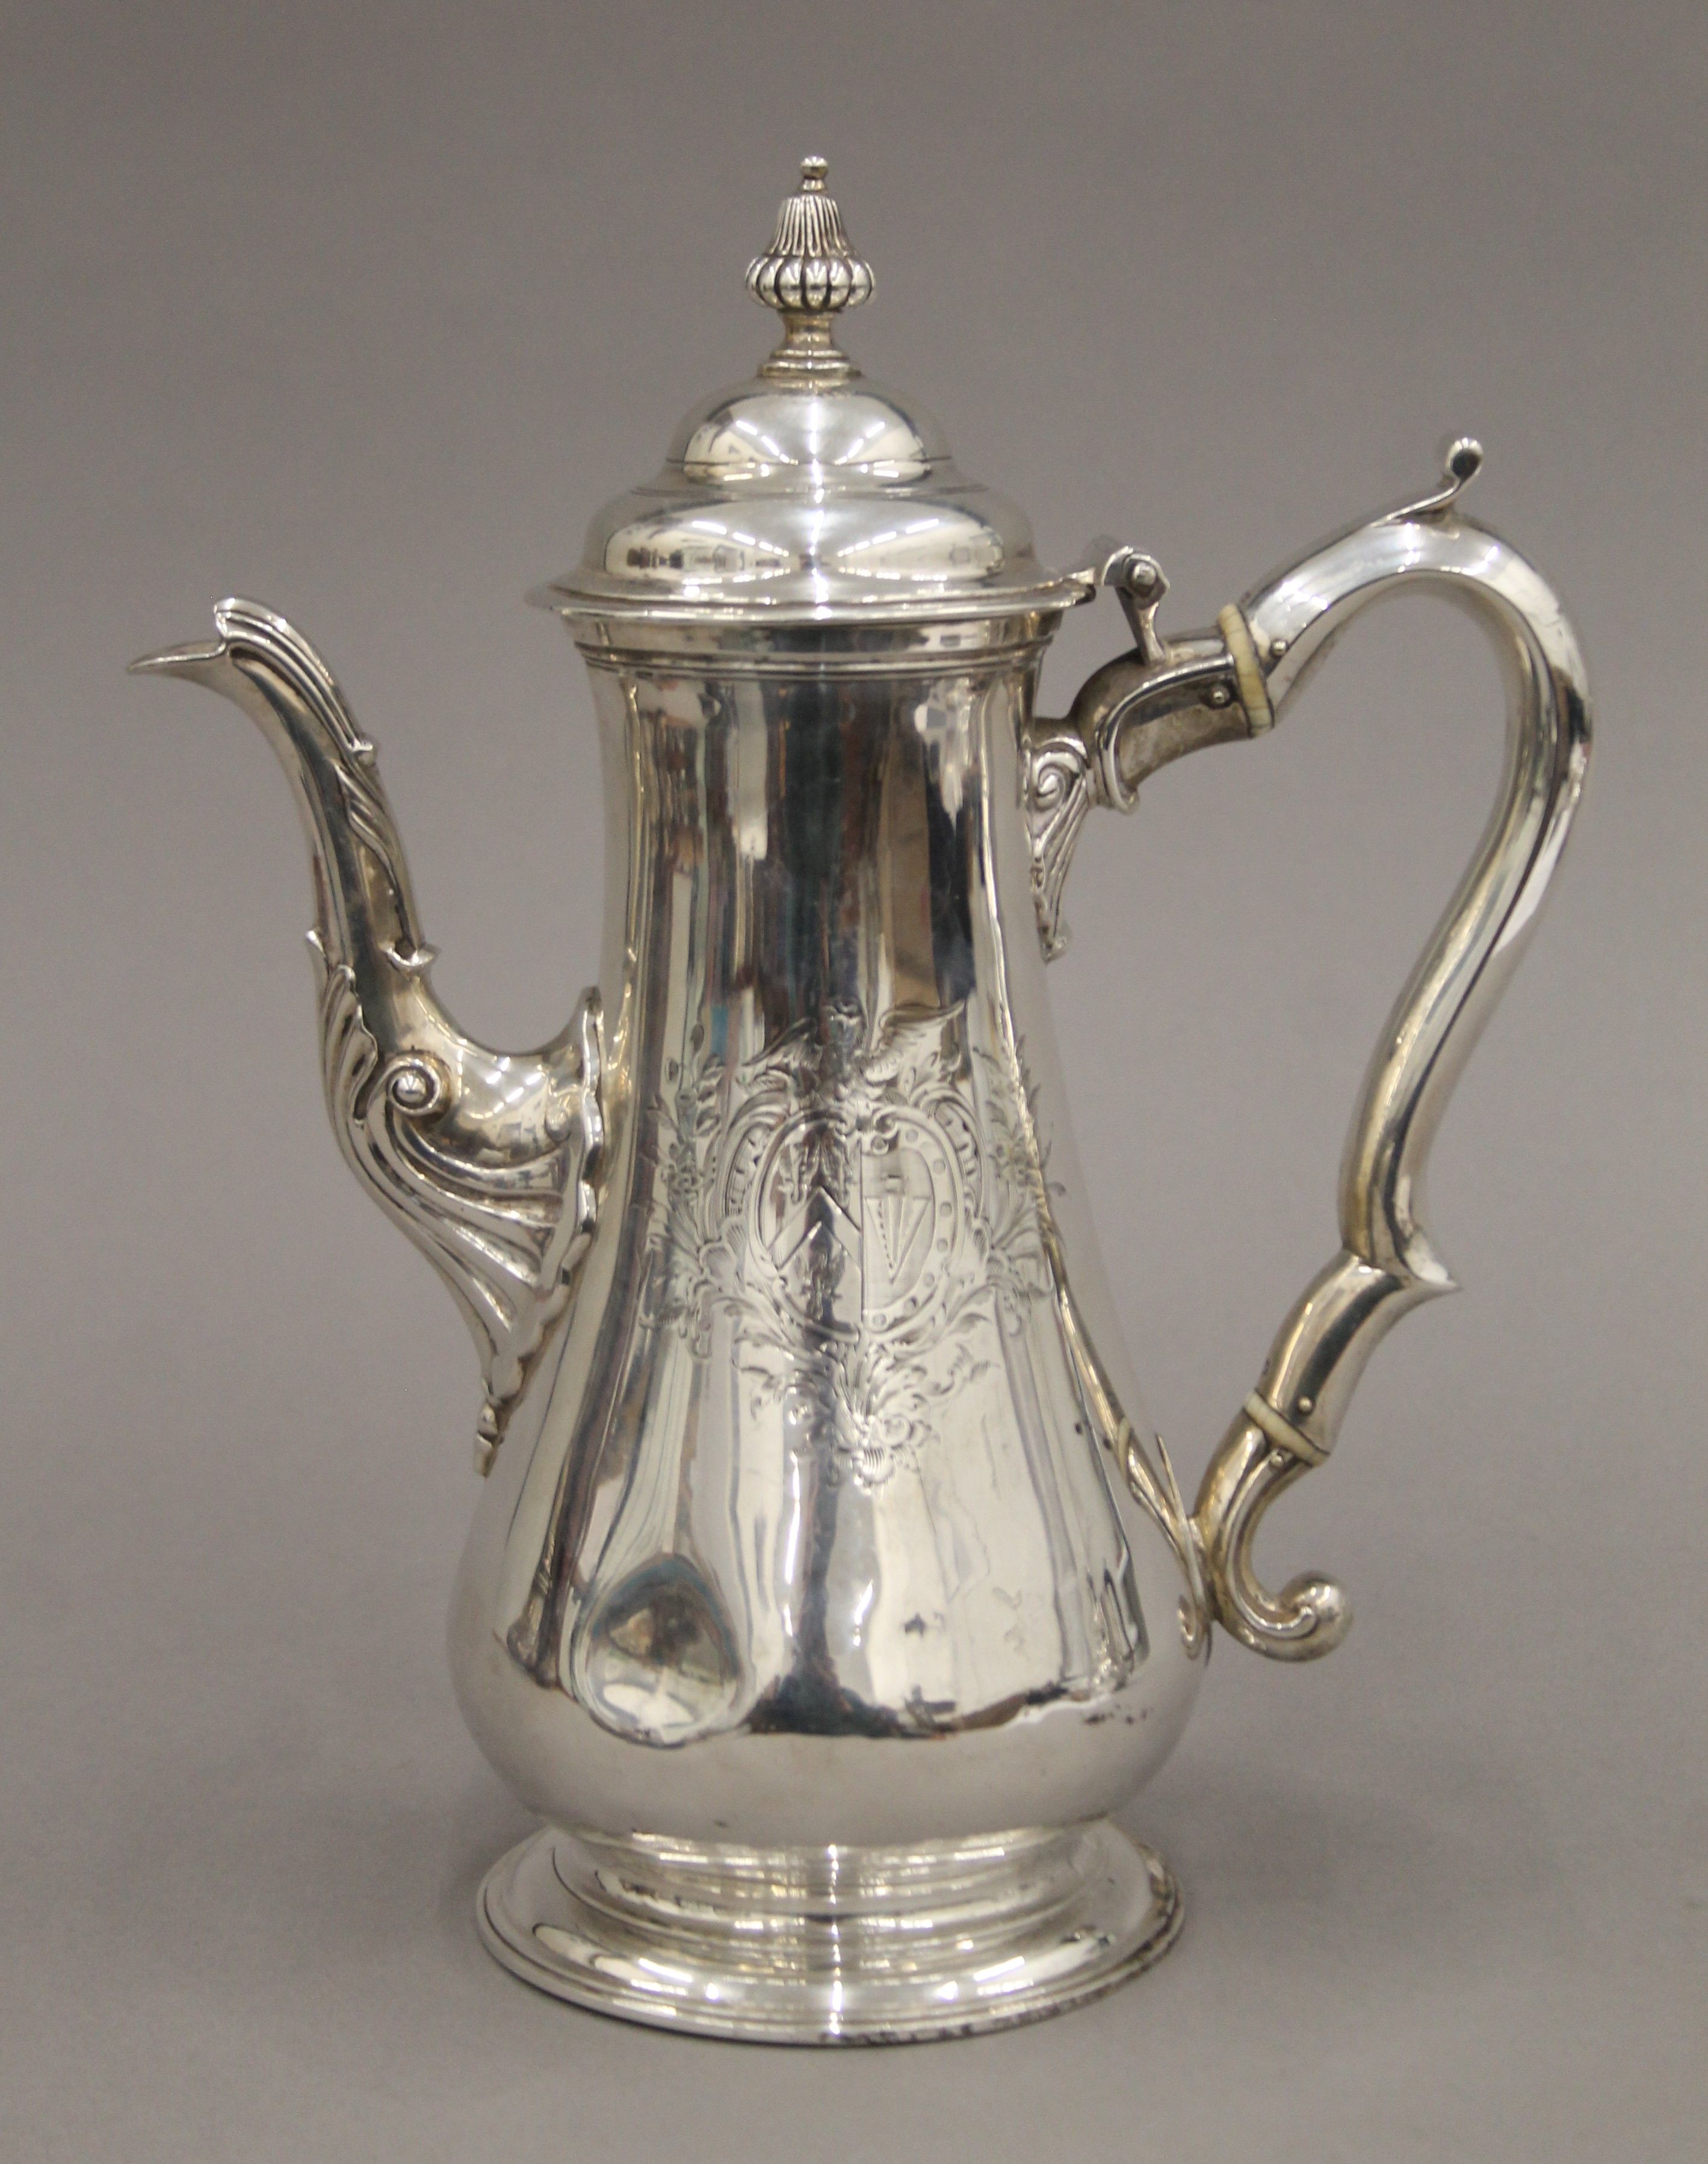 A Georgian silver coffee pot. 26.5 cm high. 784.4 grammes total weight. - Image 2 of 6